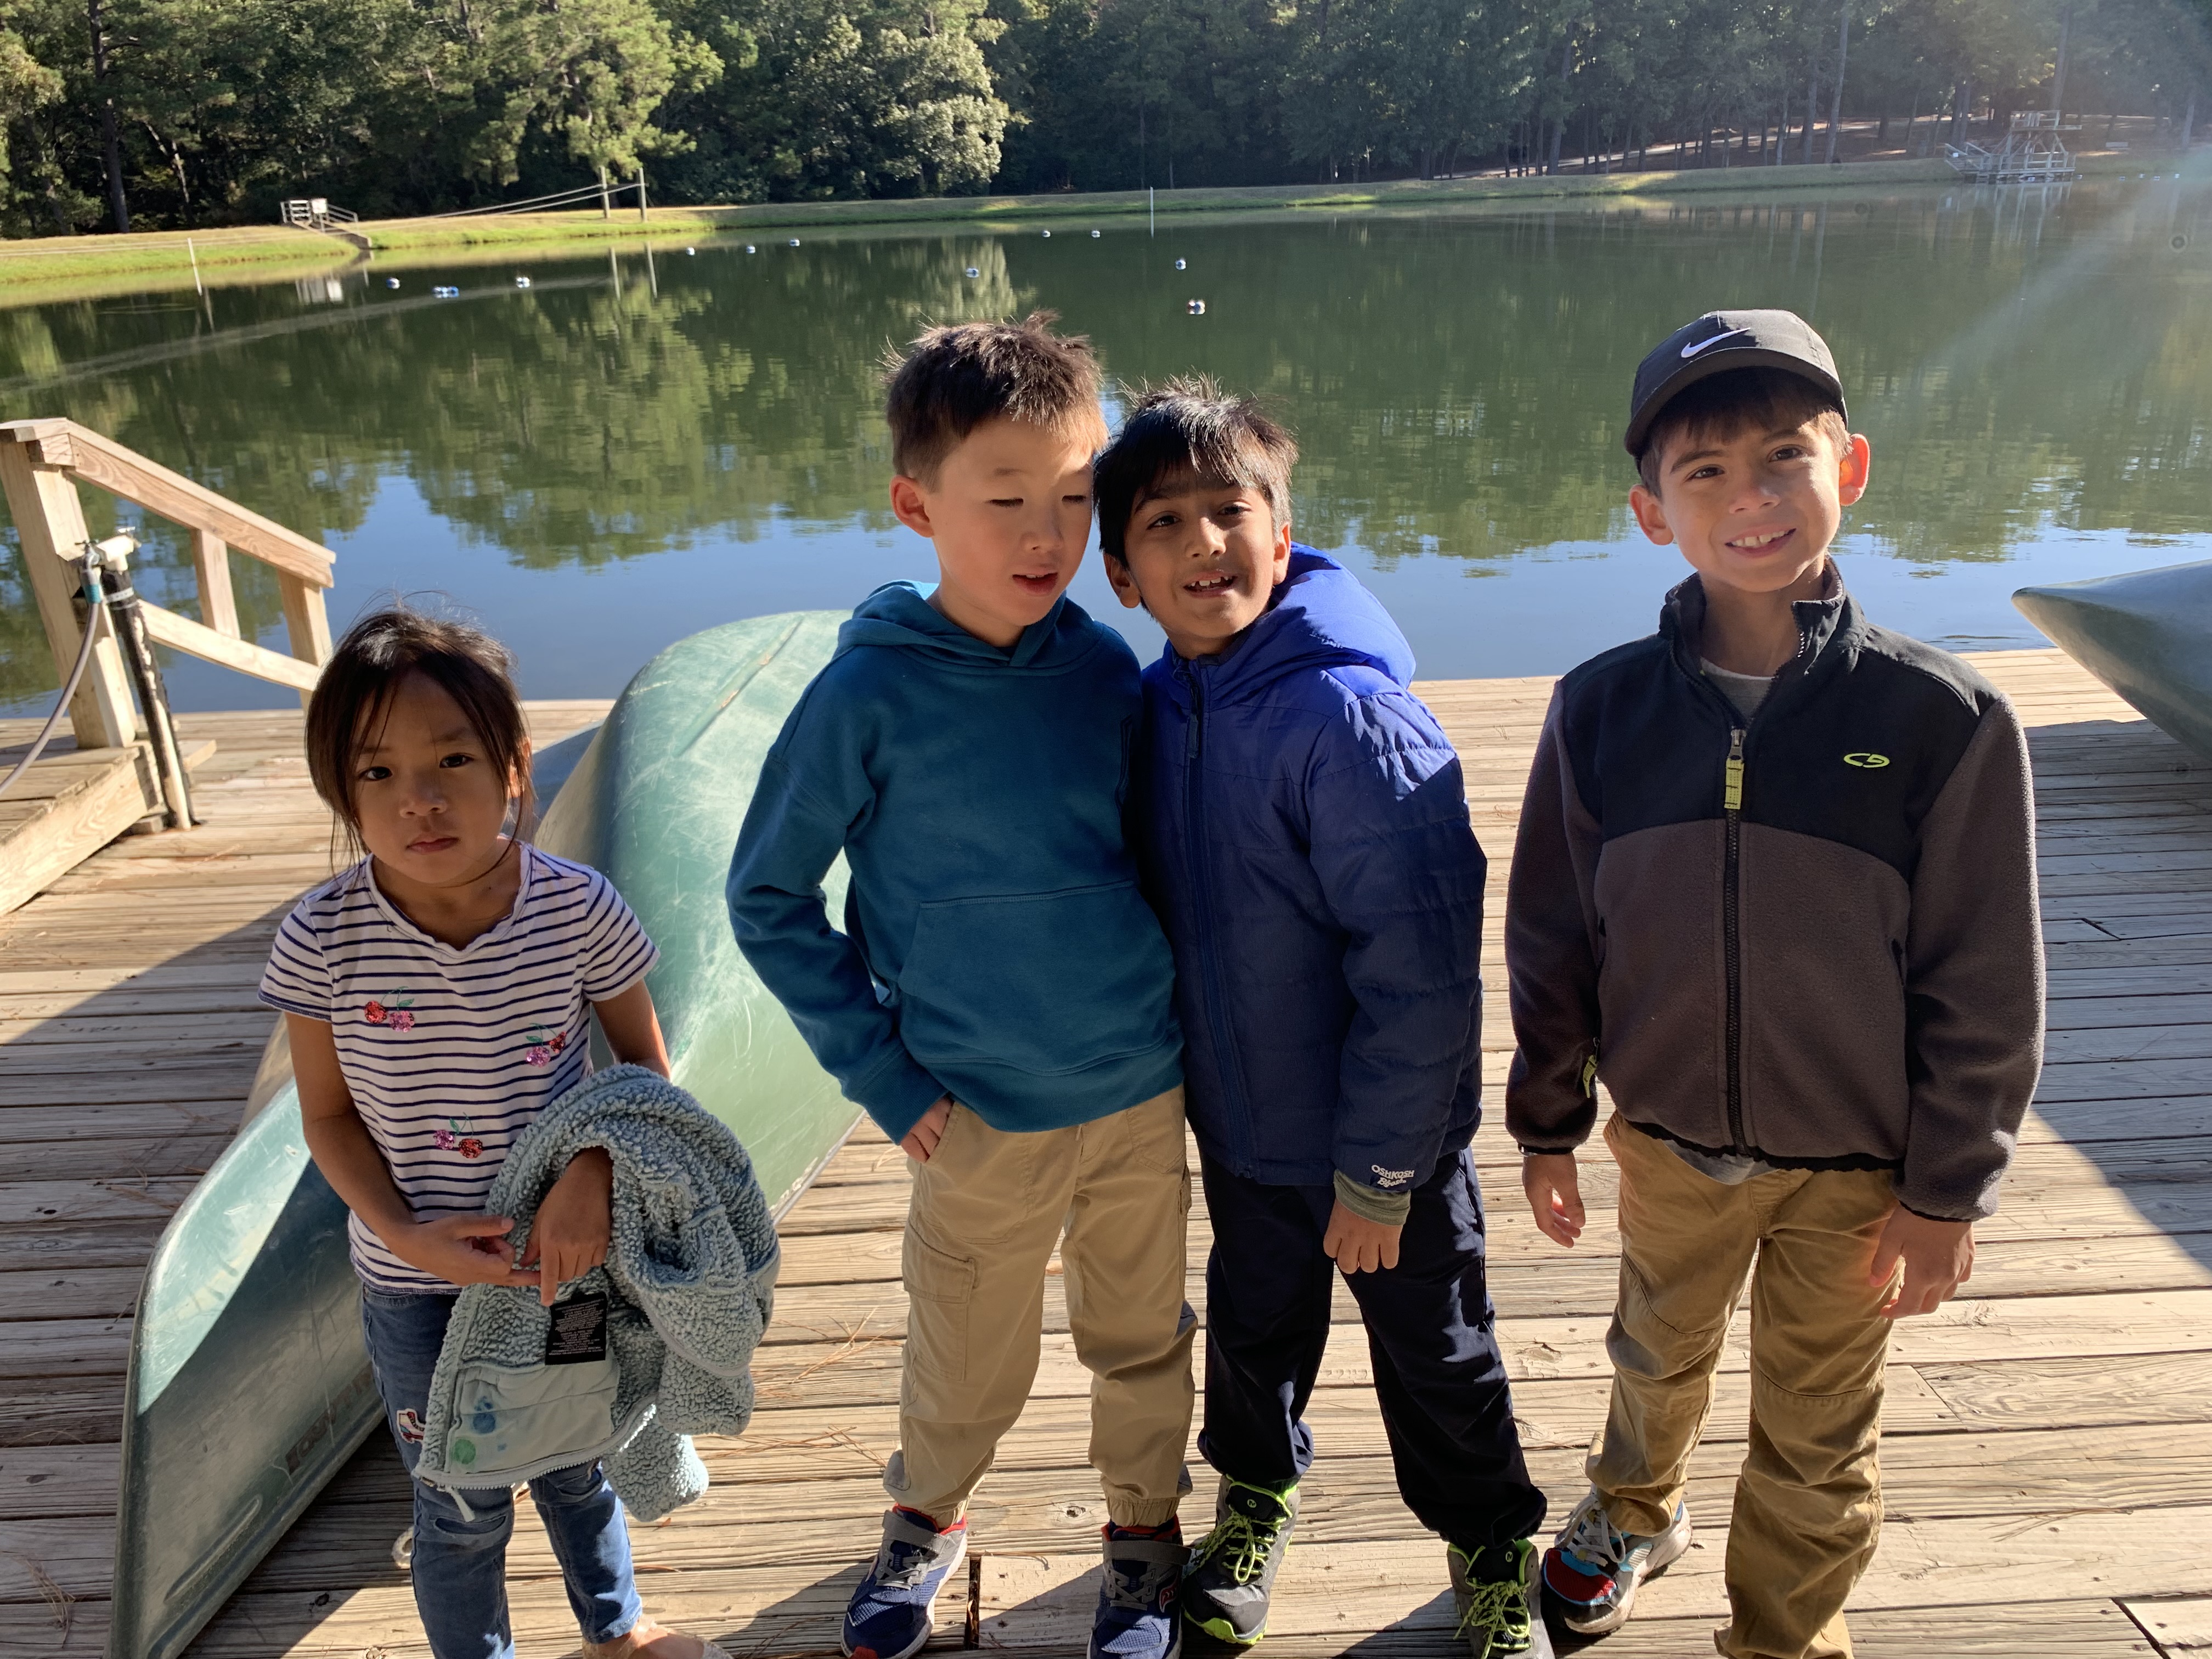 2nd grade students at Camp Allen